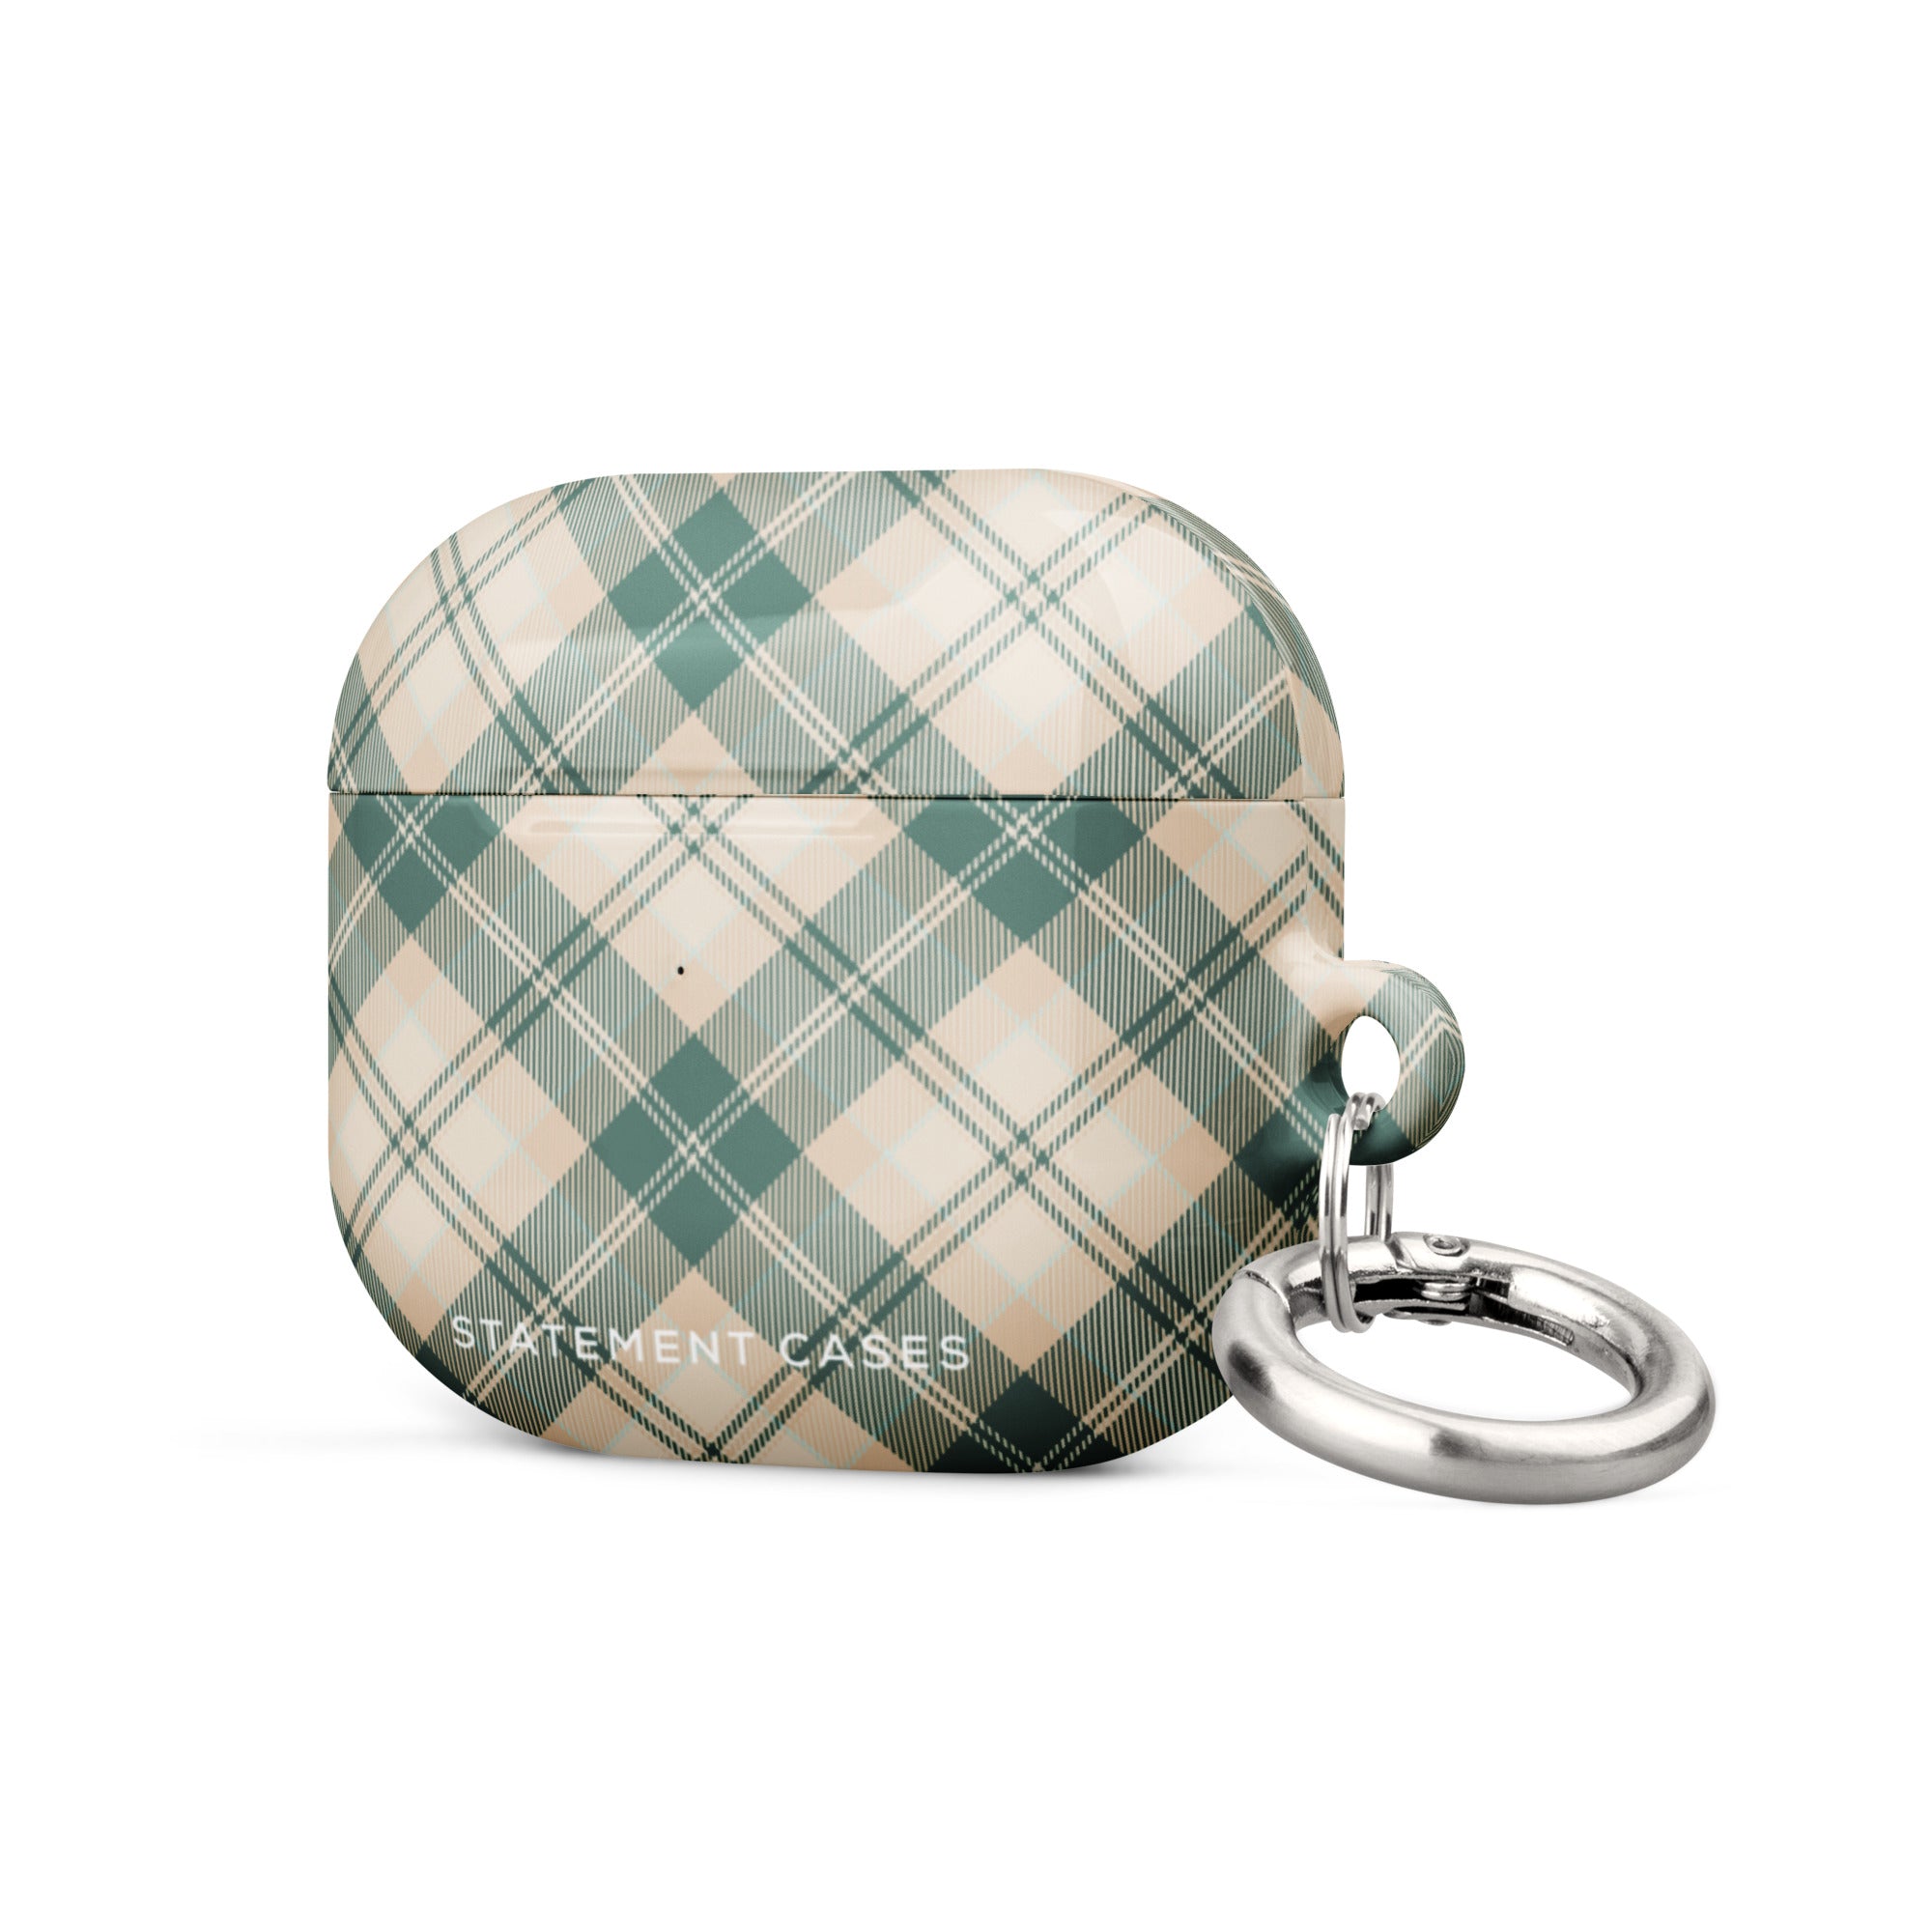 A protective Aristocrats Plaid for AirPods Gen 3 case with a green and beige plaid design, featuring impact-absorbing material. A metal carabiner is attached to the side for convenience, and the text "Statement Cases" is printed at the bottom of the case.